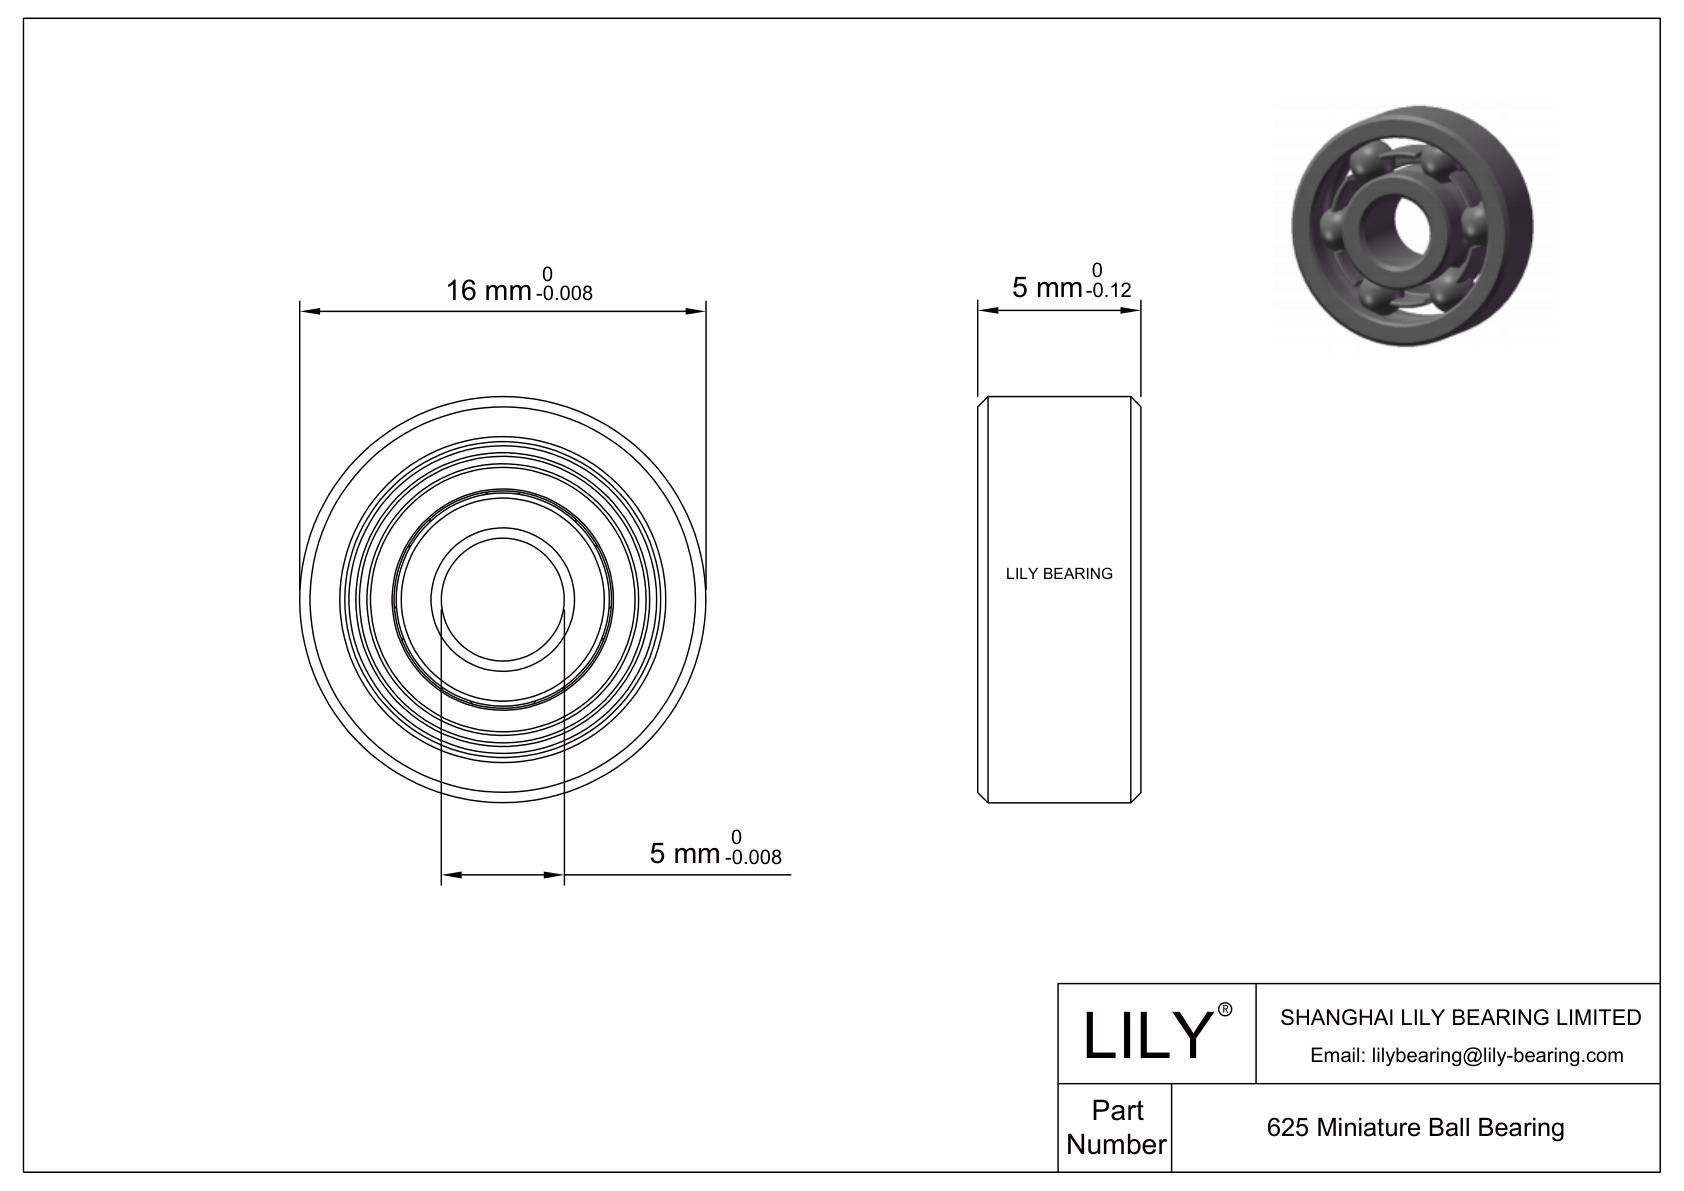 LILY-BS62524-5 POM Coated Bearing cad drawing